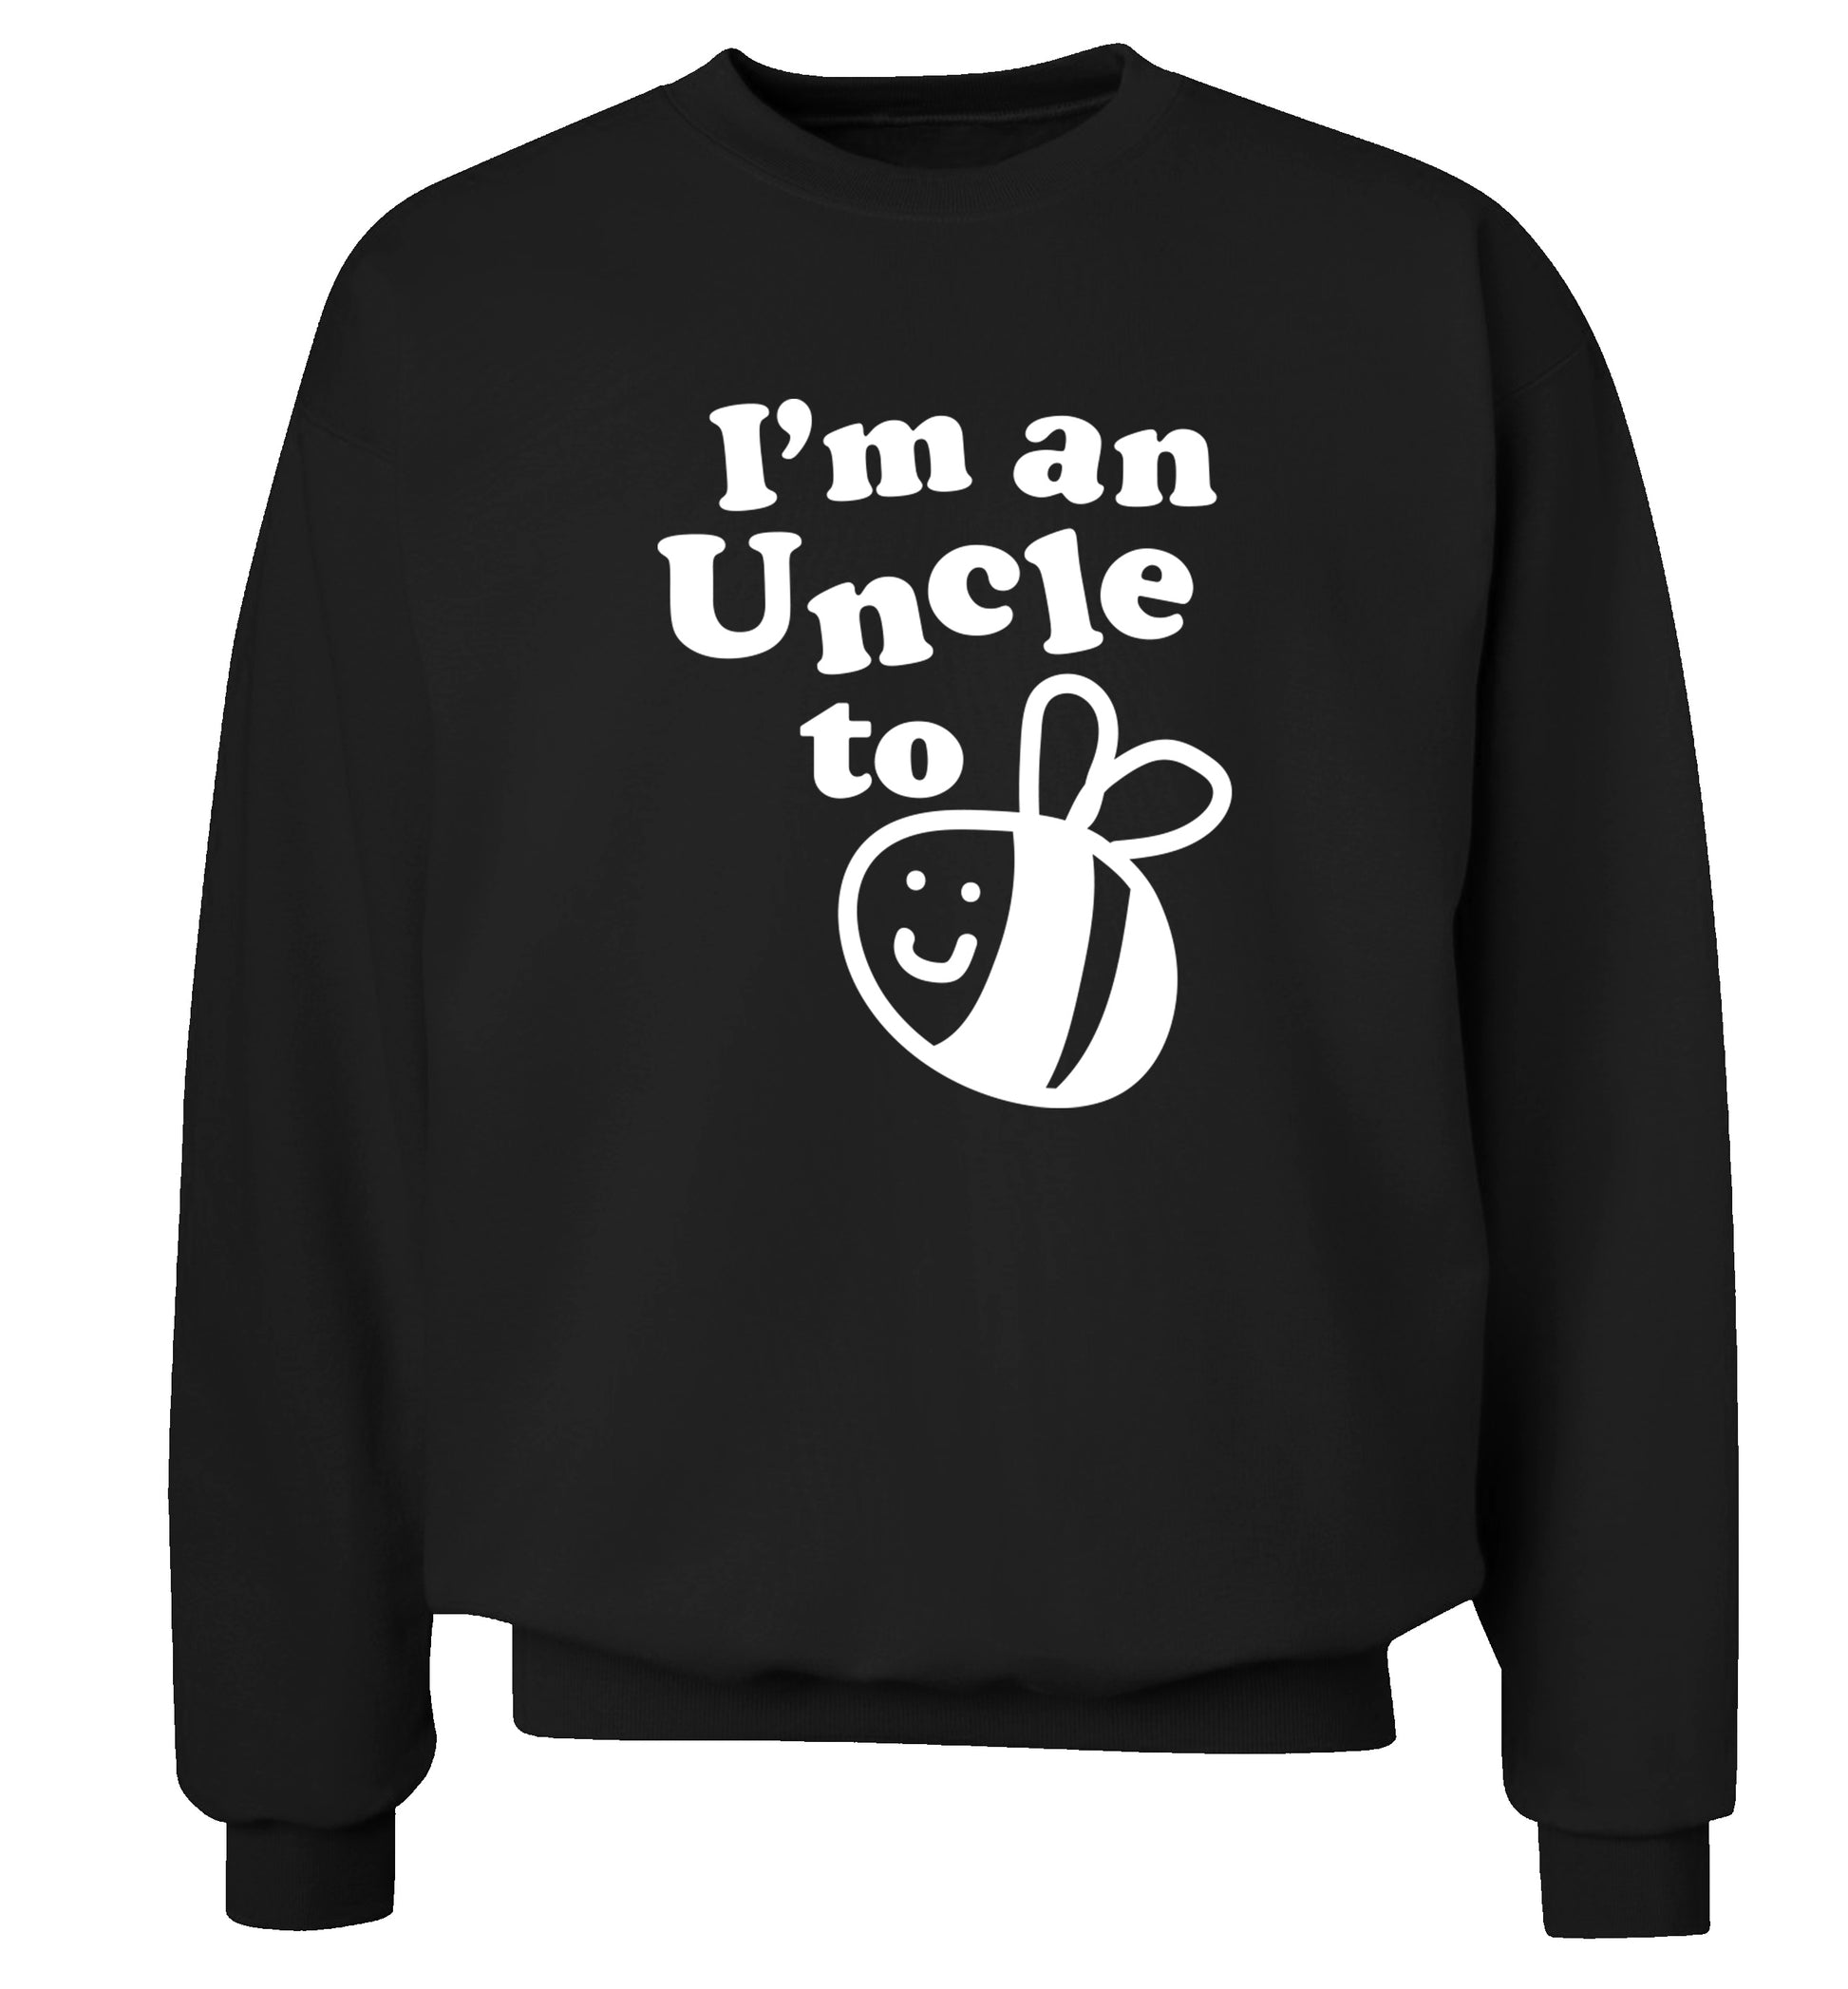 I'm an uncle to be Adult's unisex black Sweater 2XL